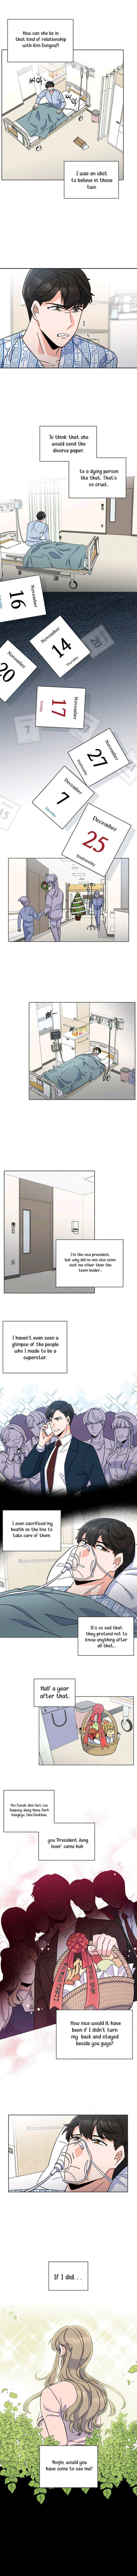 1st year Max Level Manager - Chapter 1 Page 8